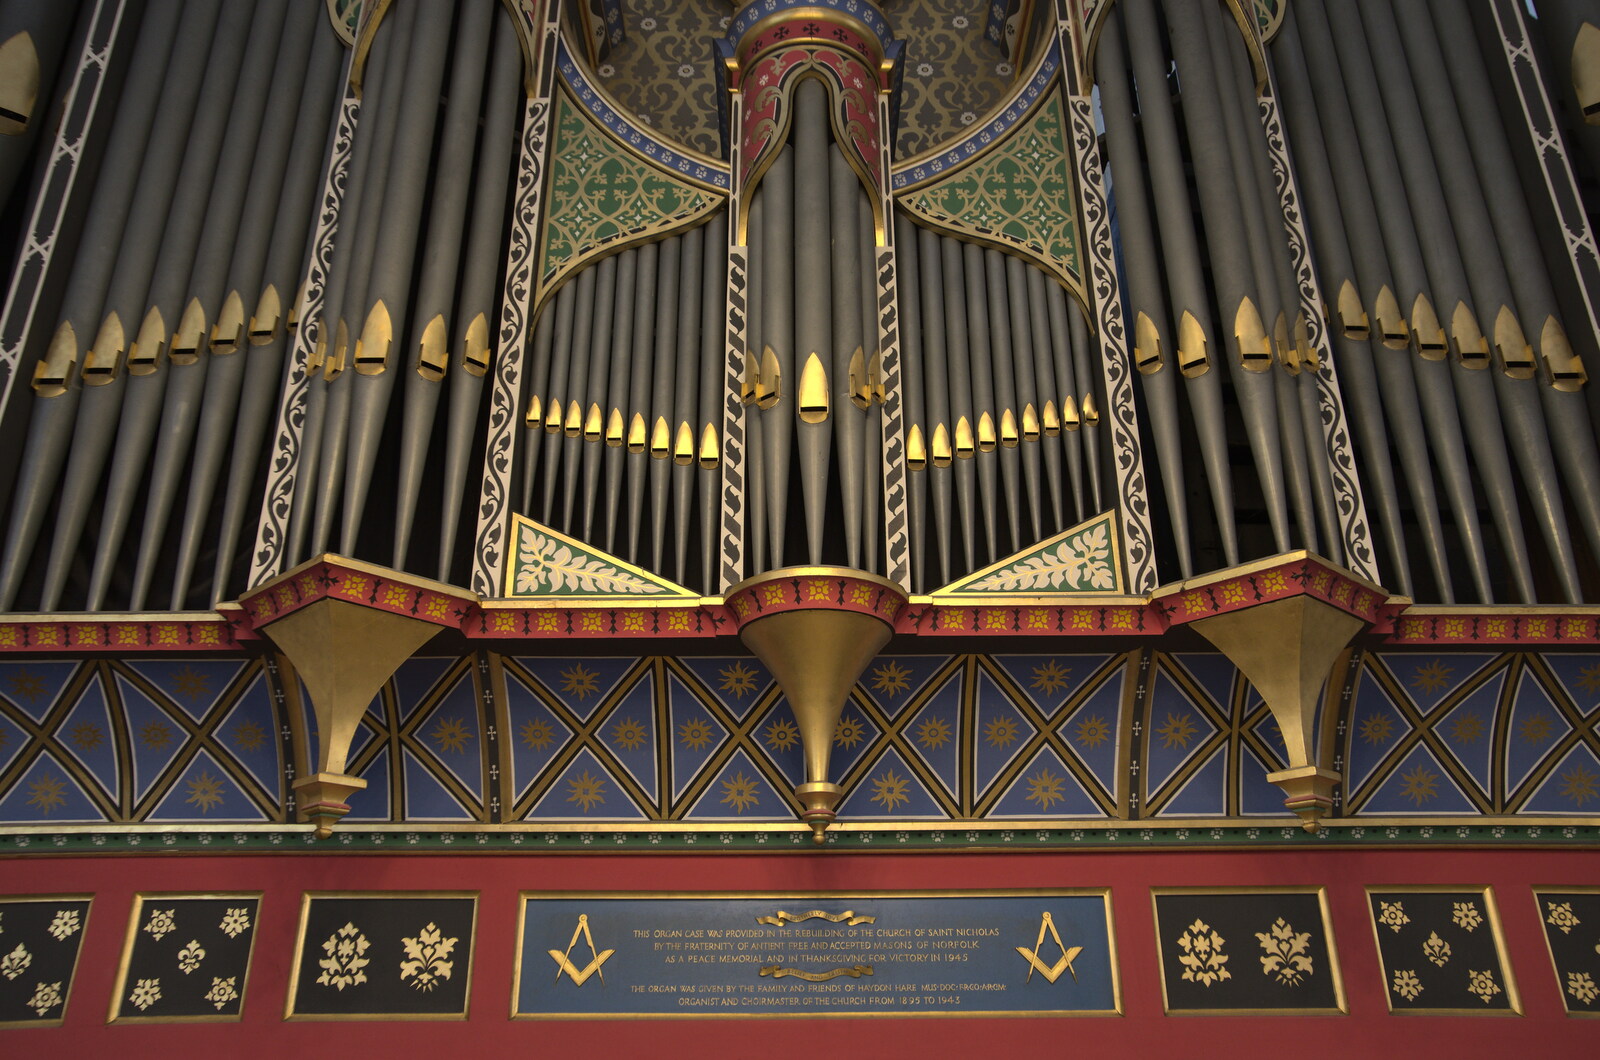 The 1876 William Hill organ from Faded Seaside Glamour: A Weekend in Great Yarmouth, Norfolk - 29th May 2022